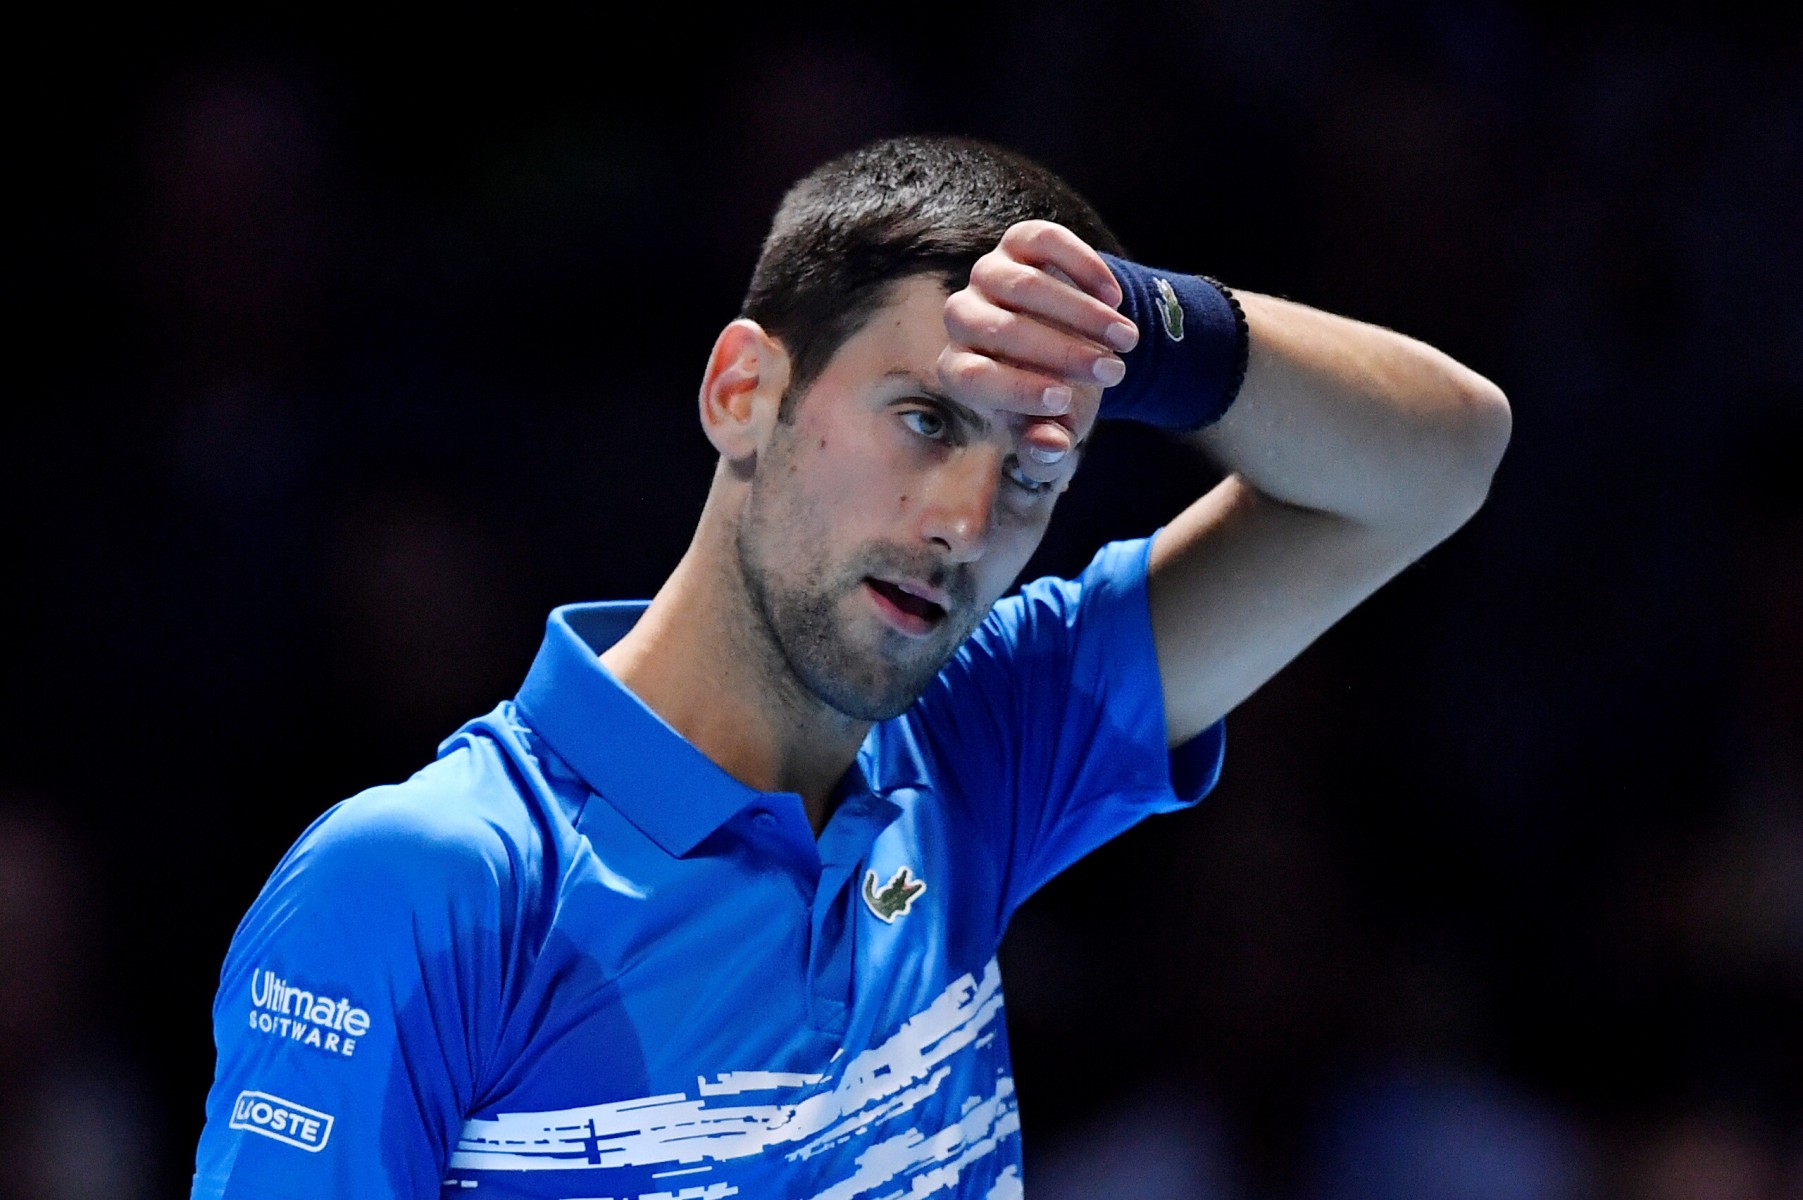 Novak Djokovic knew there was a chance he could pip his long-term rival until he lost to Roger Federer